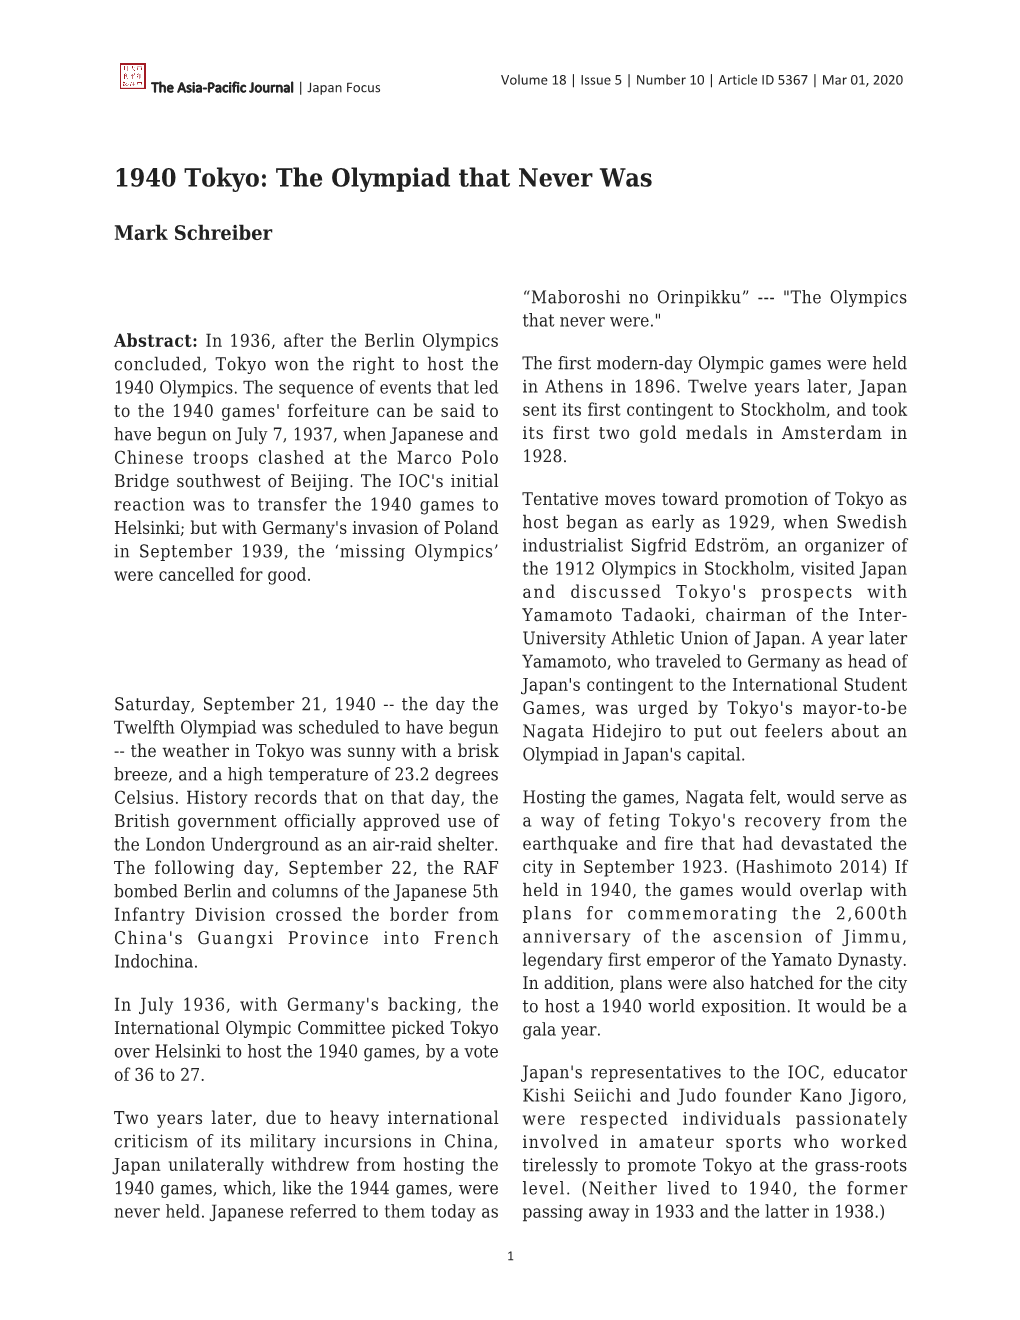 1940 Tokyo: the Olympiad That Never Was